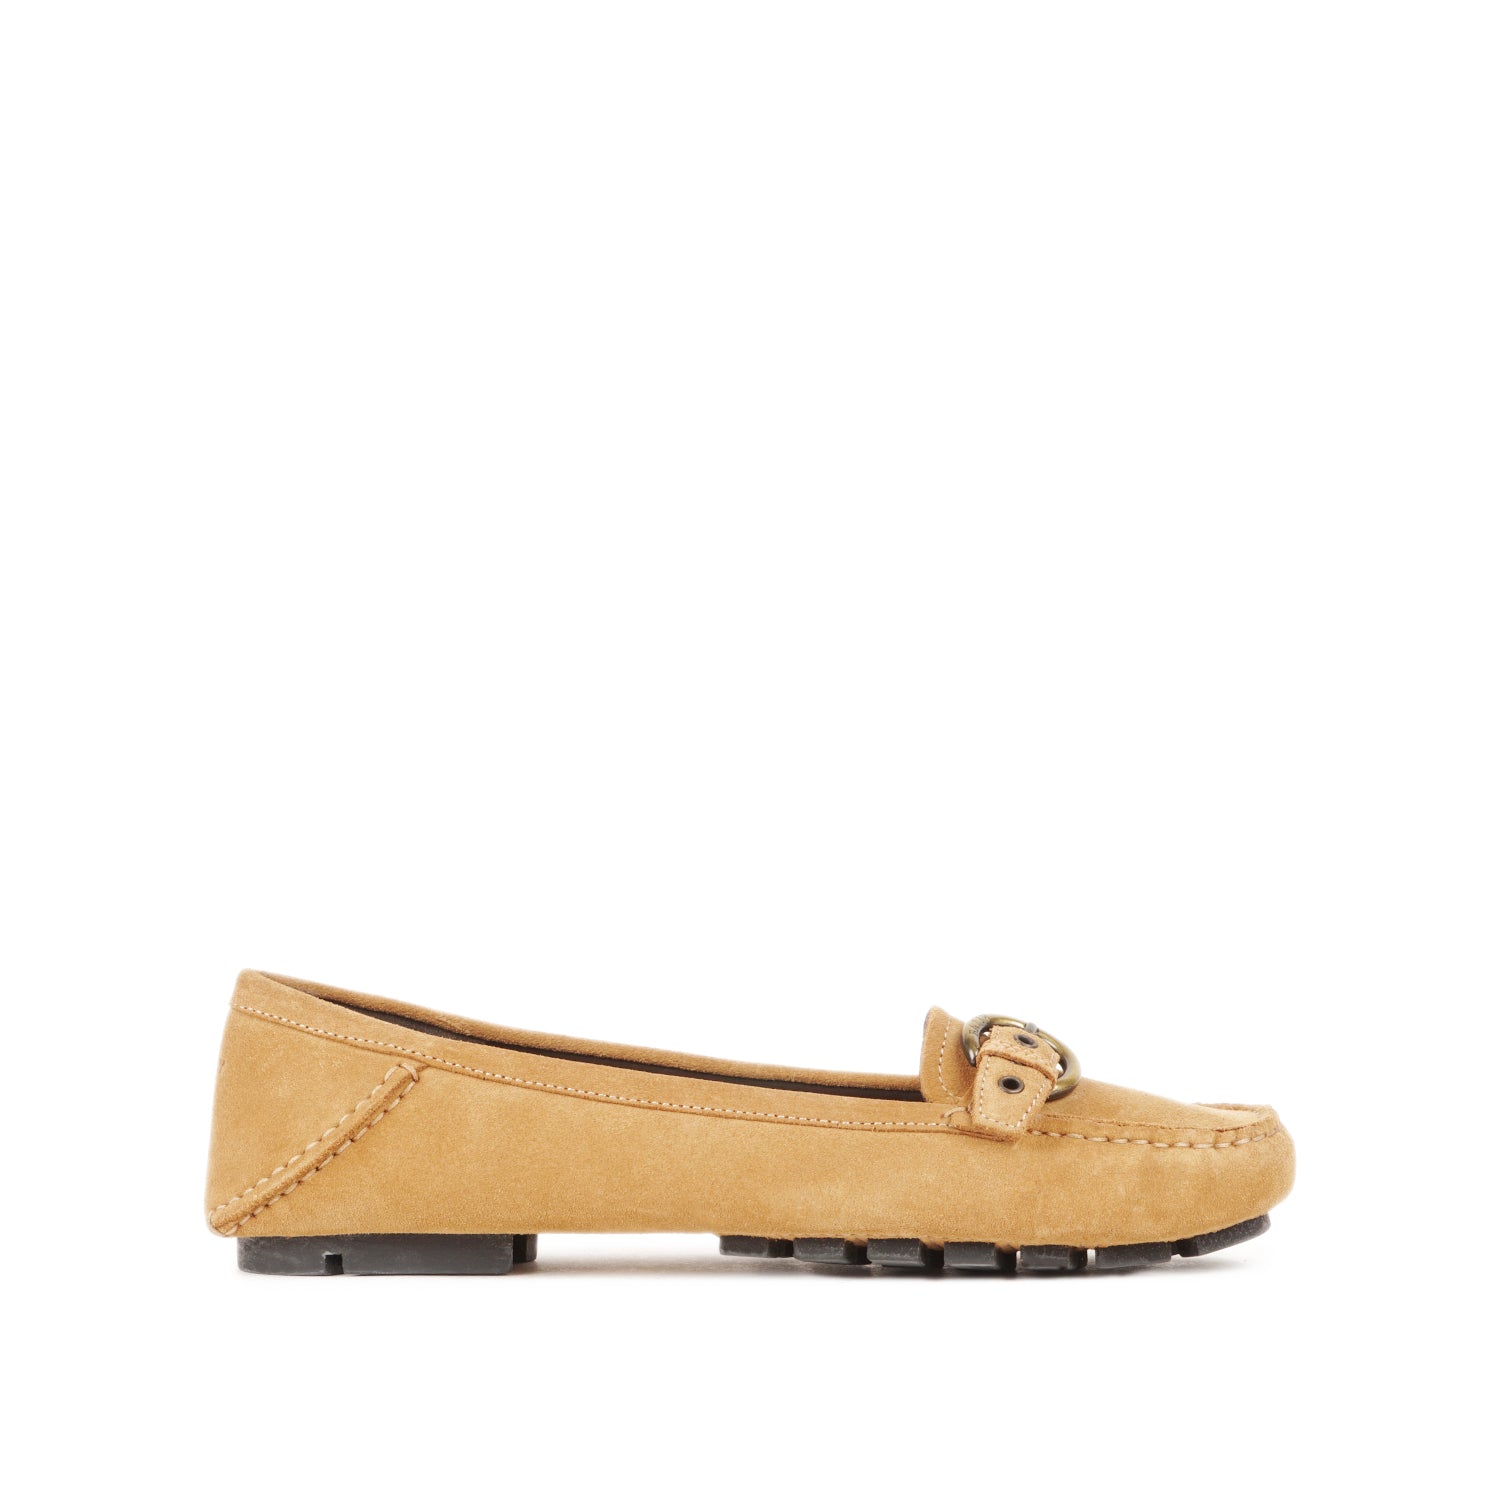 BALLY LEATHER BALLET SHOES